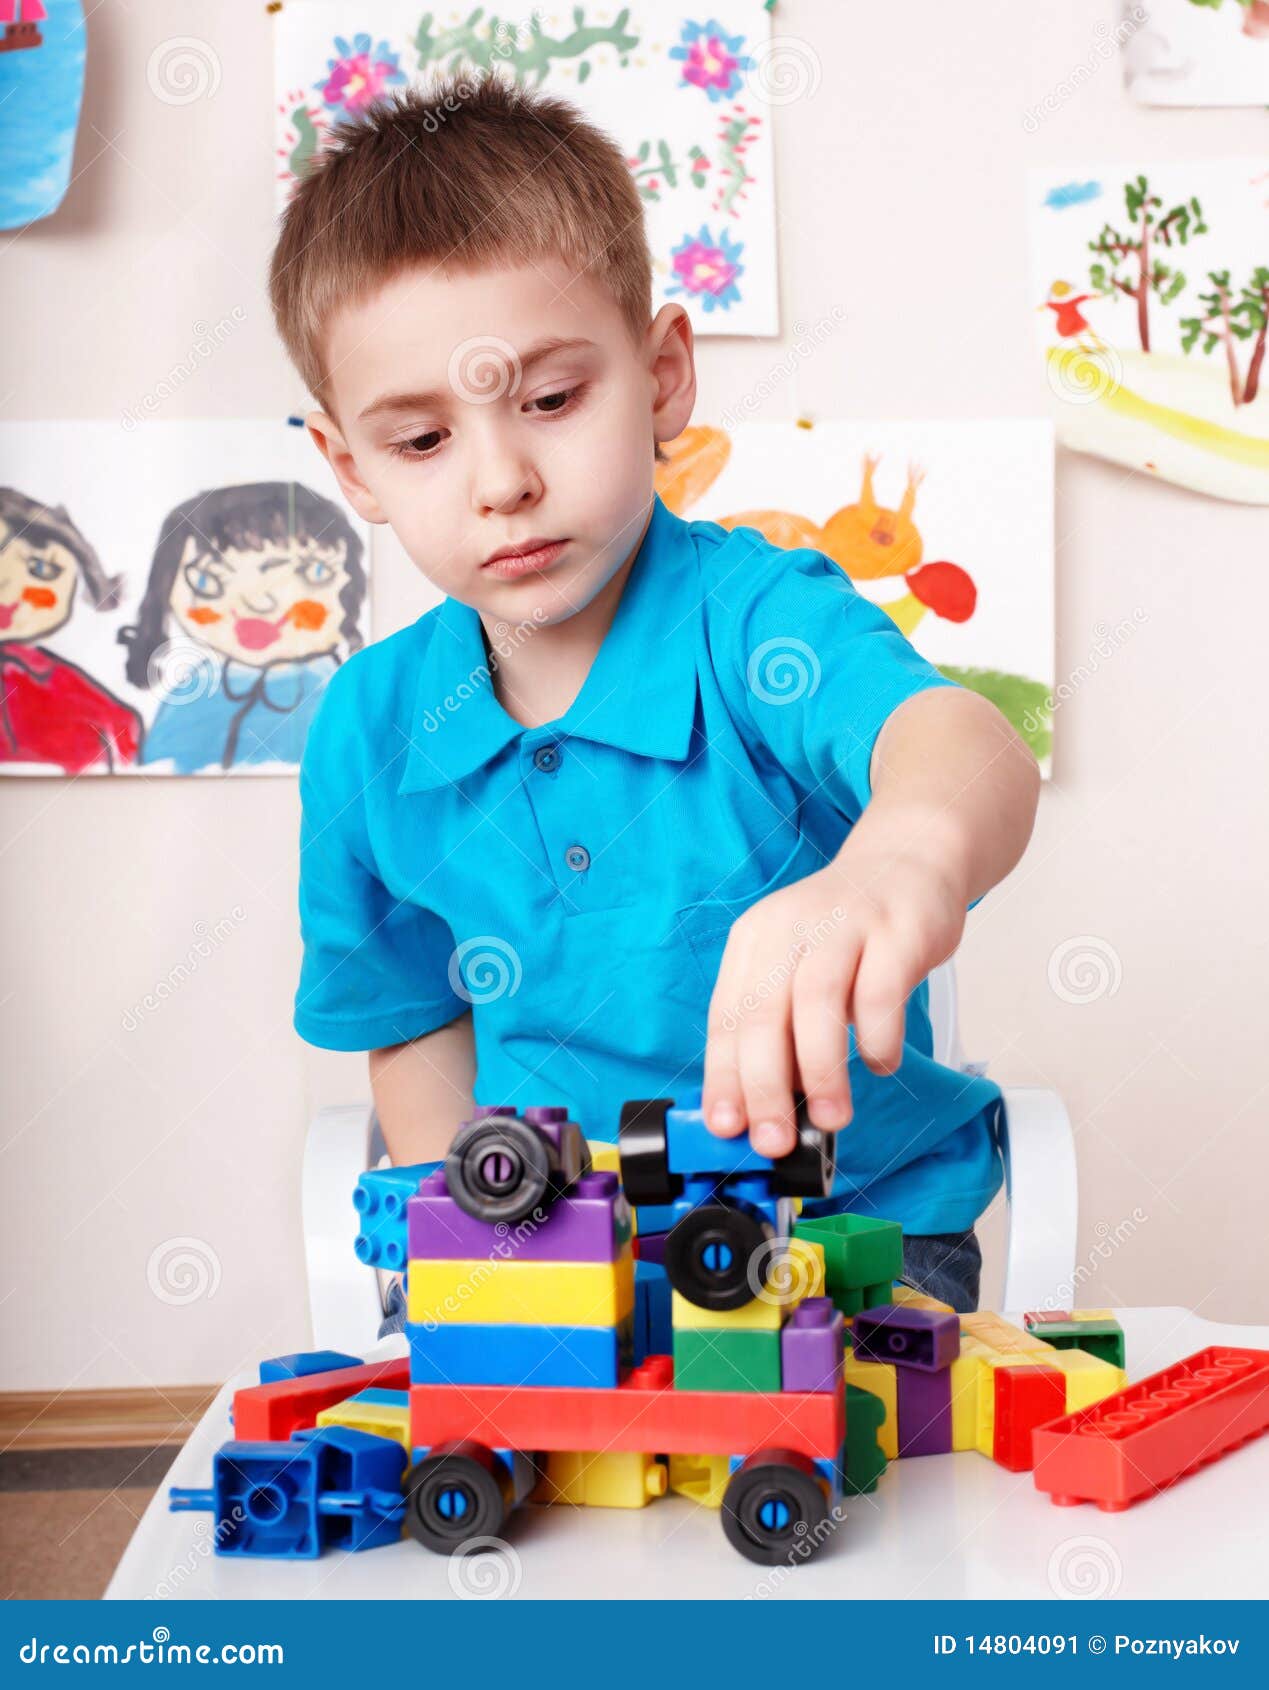 Child Play  Construction Set At Home  Stock Image Image 